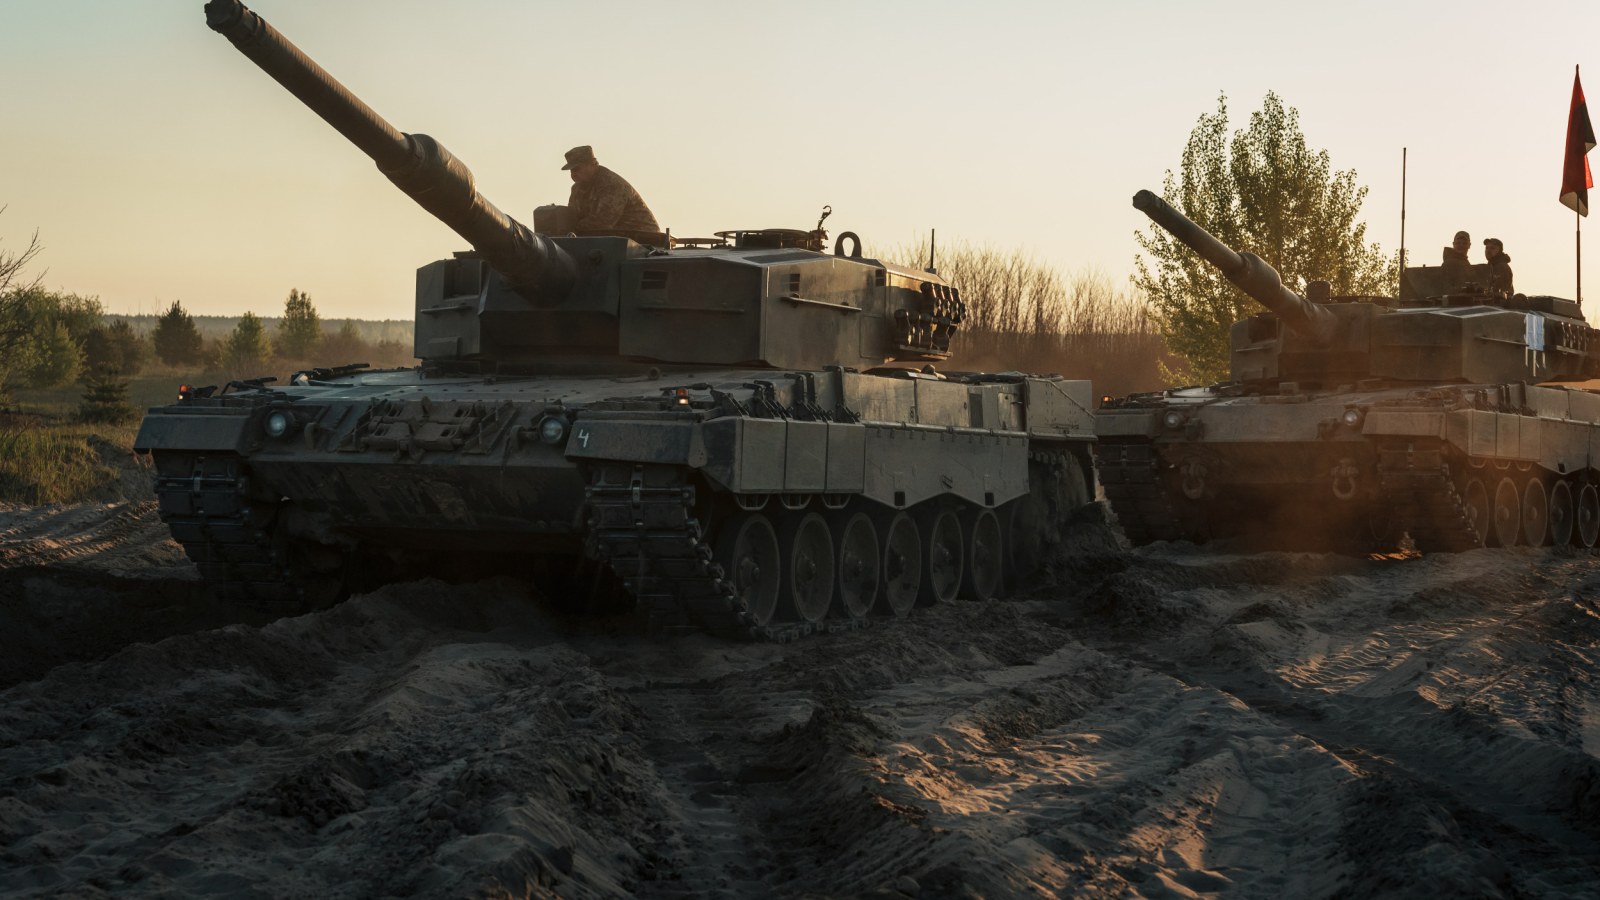 Ukraine To Get More Leopard 2 Tanks As Counteroffensive Heats Up